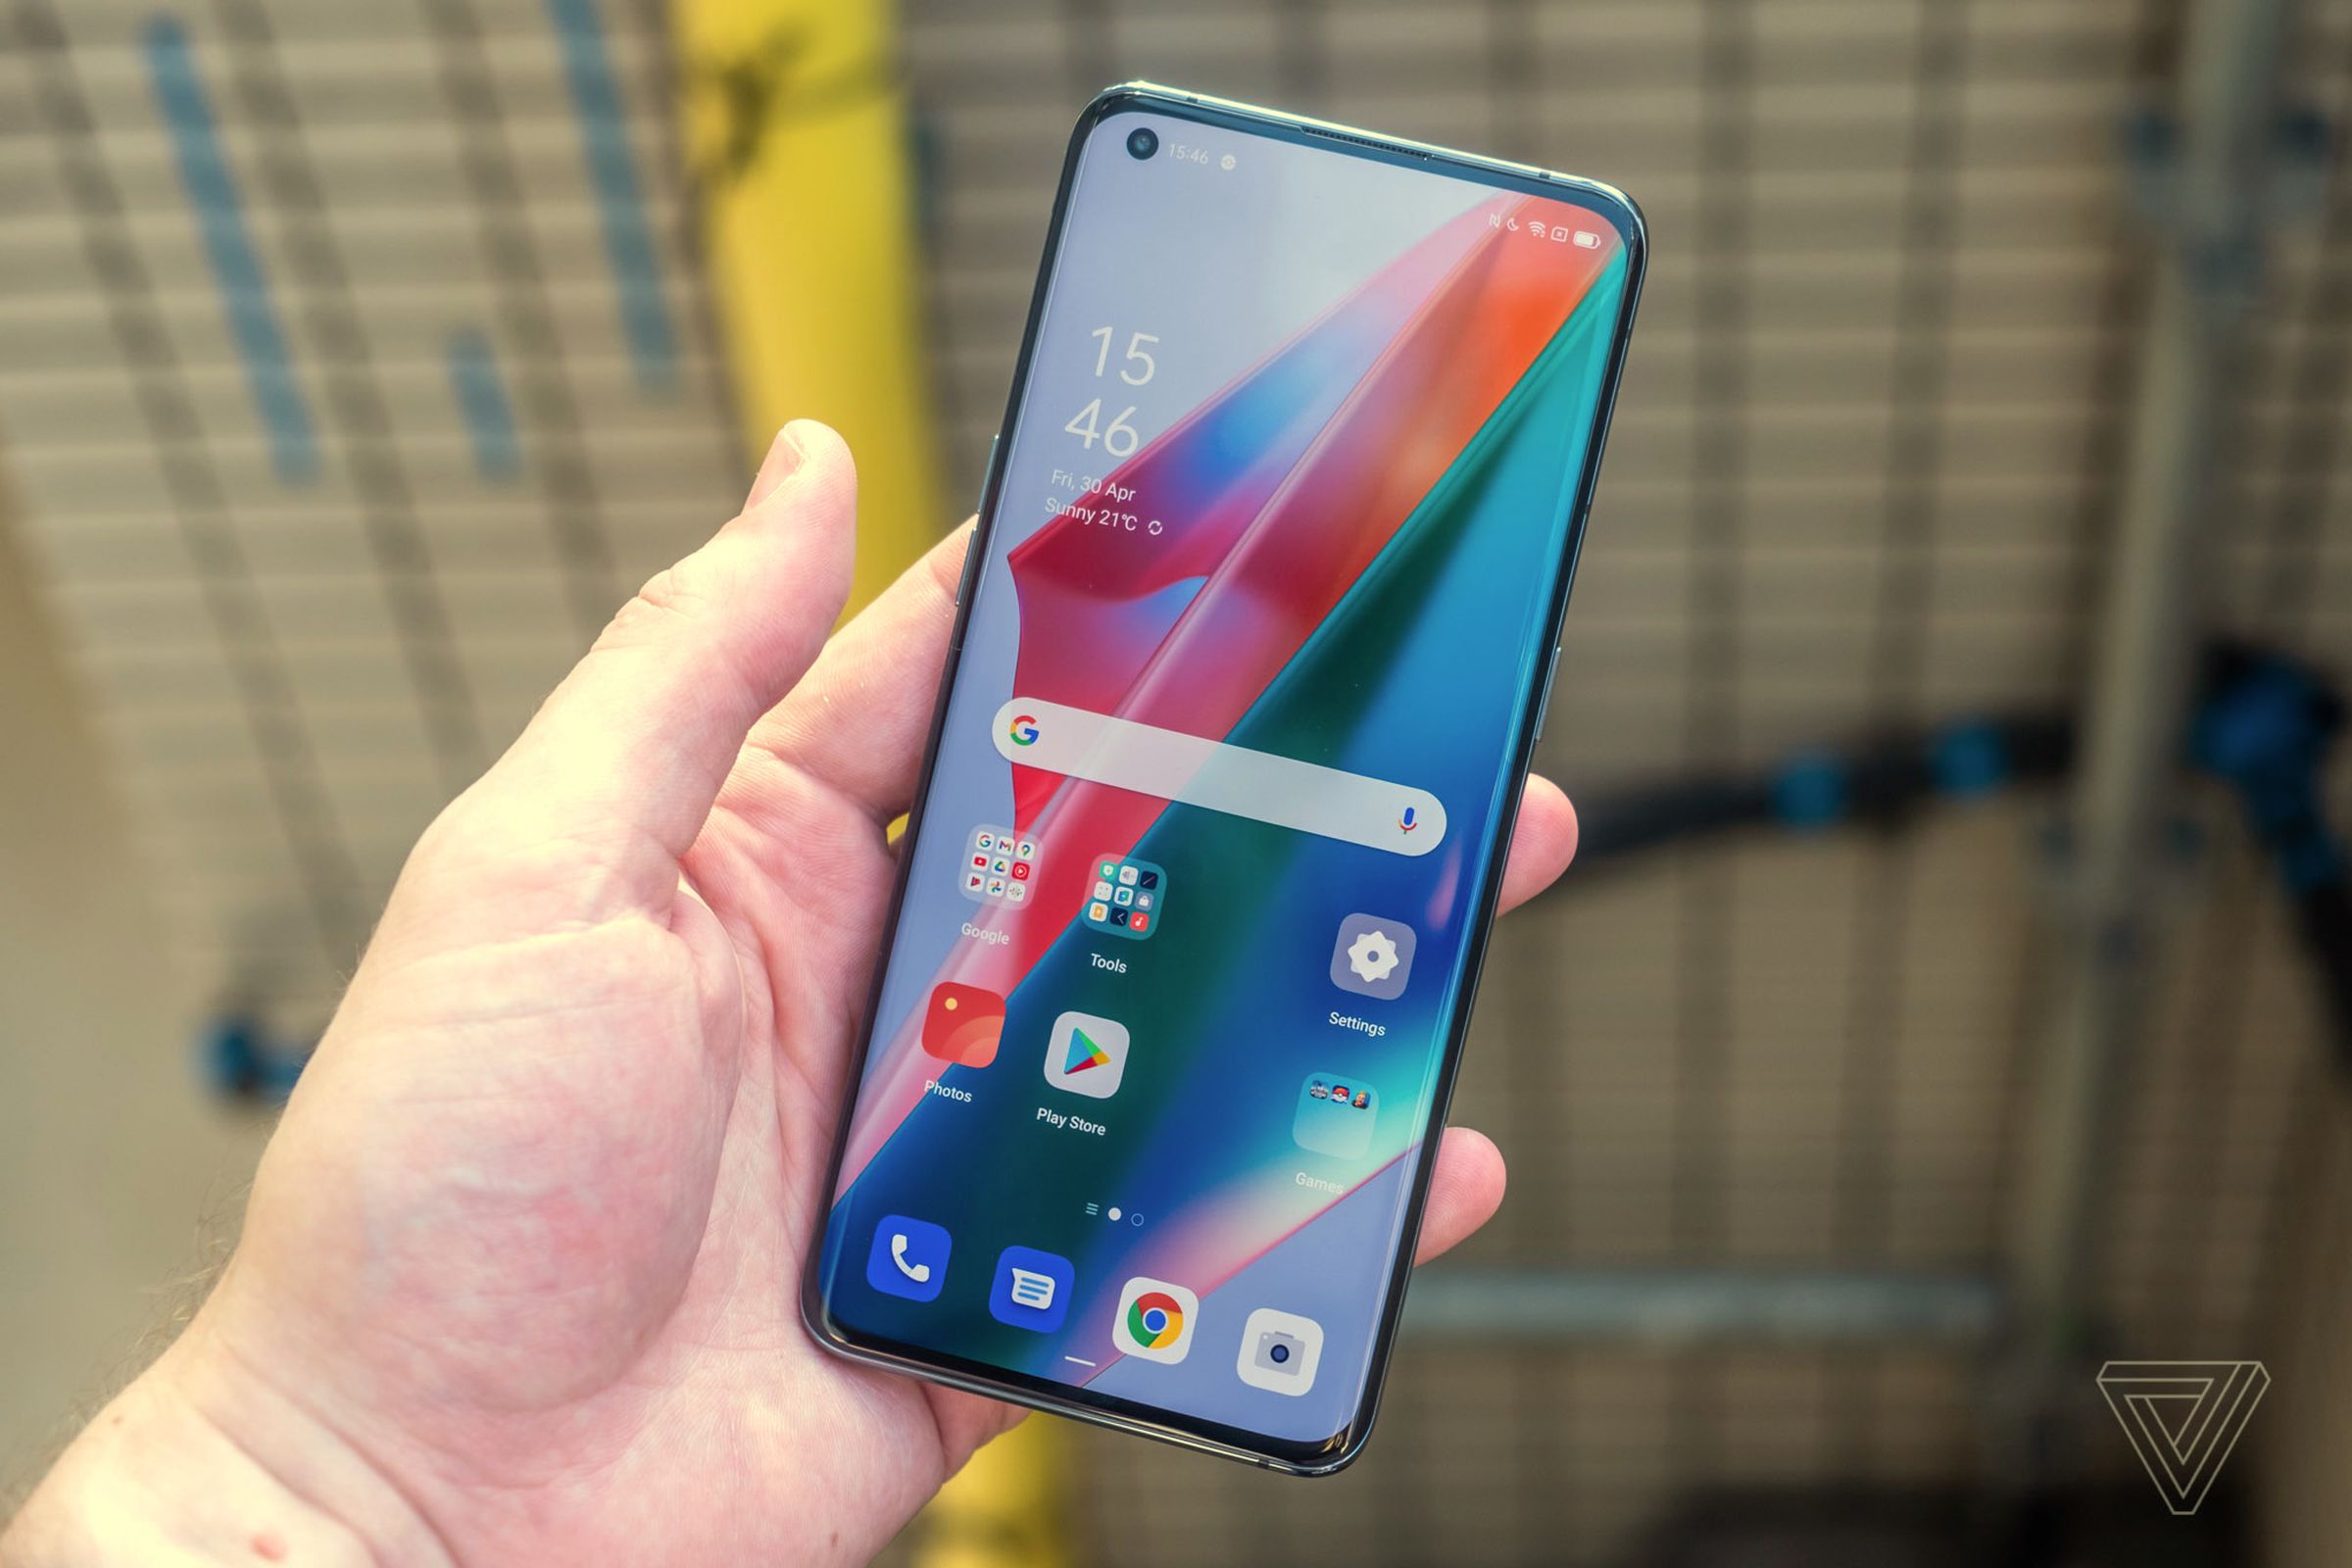 The Find X3 Pro looks very similar to the OnePlus 9 Pro from the front.